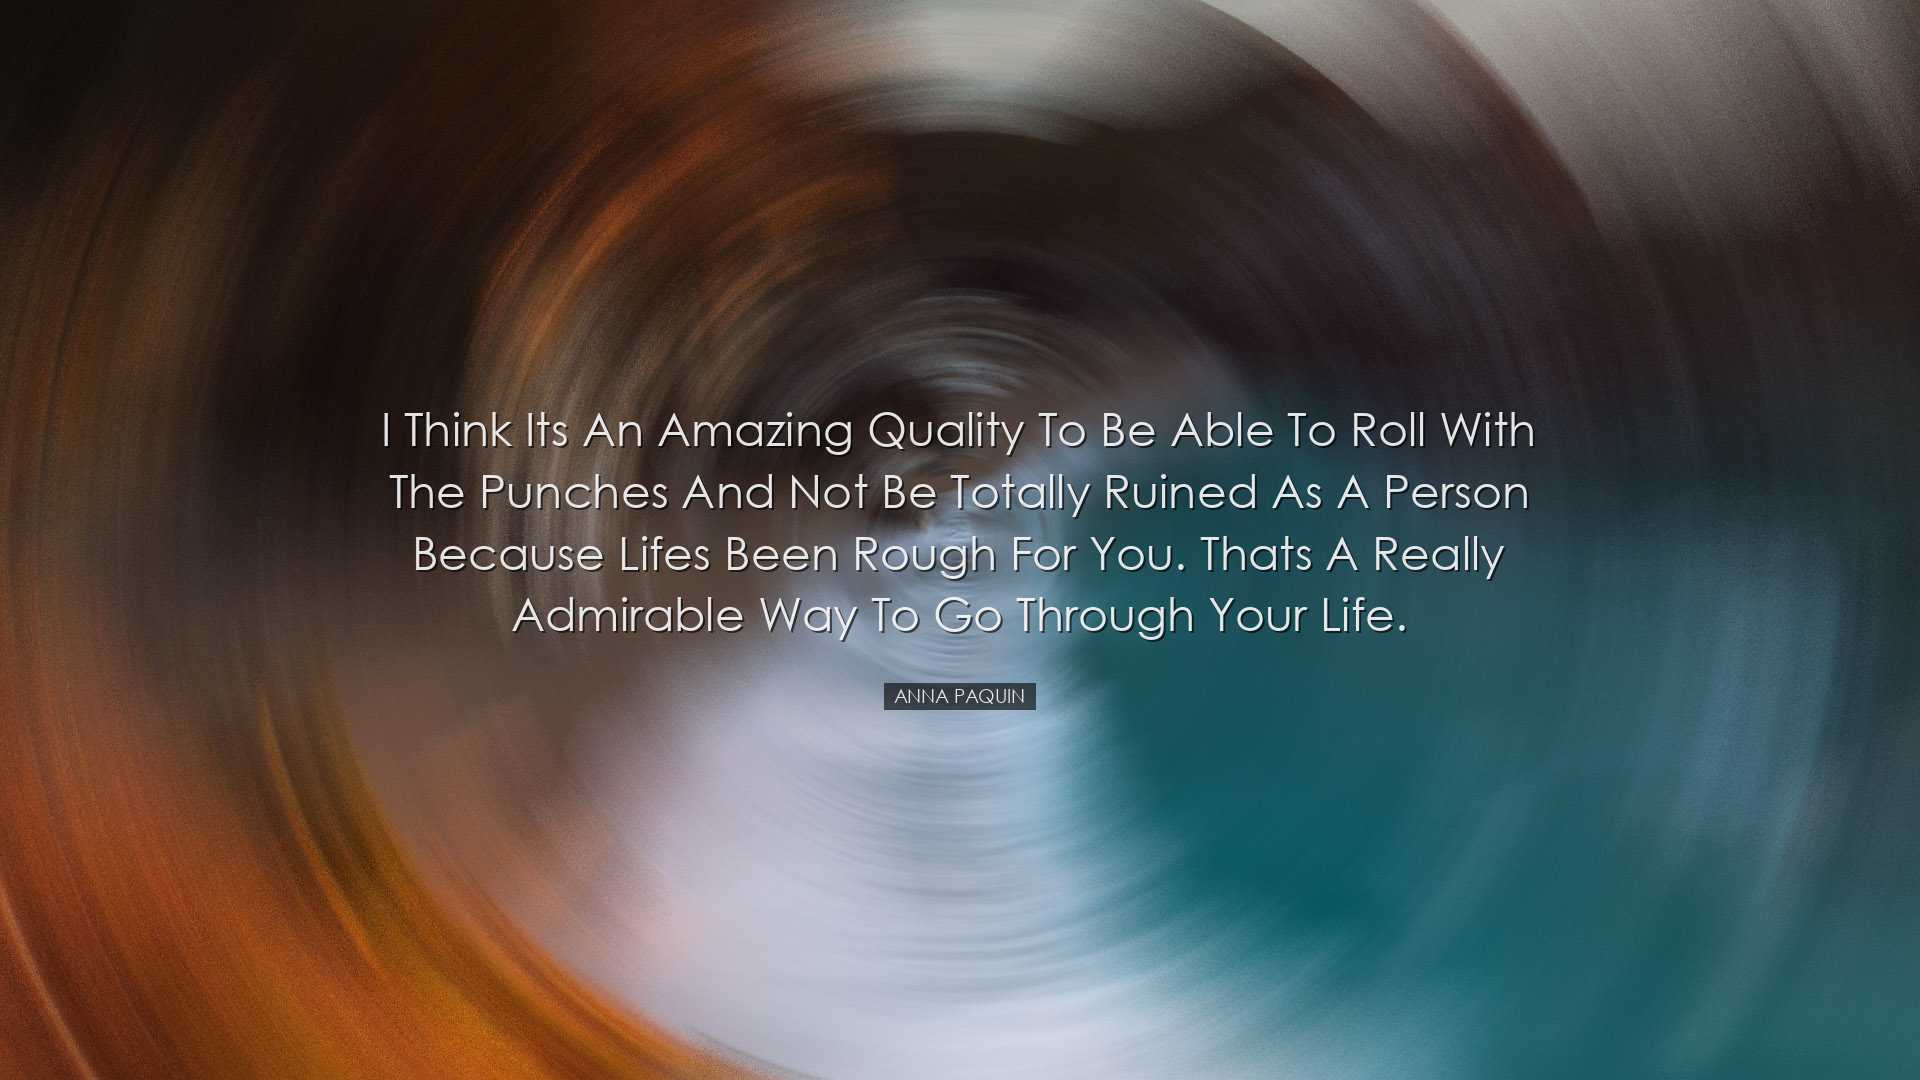 I think its an amazing quality to be able to roll with the punches